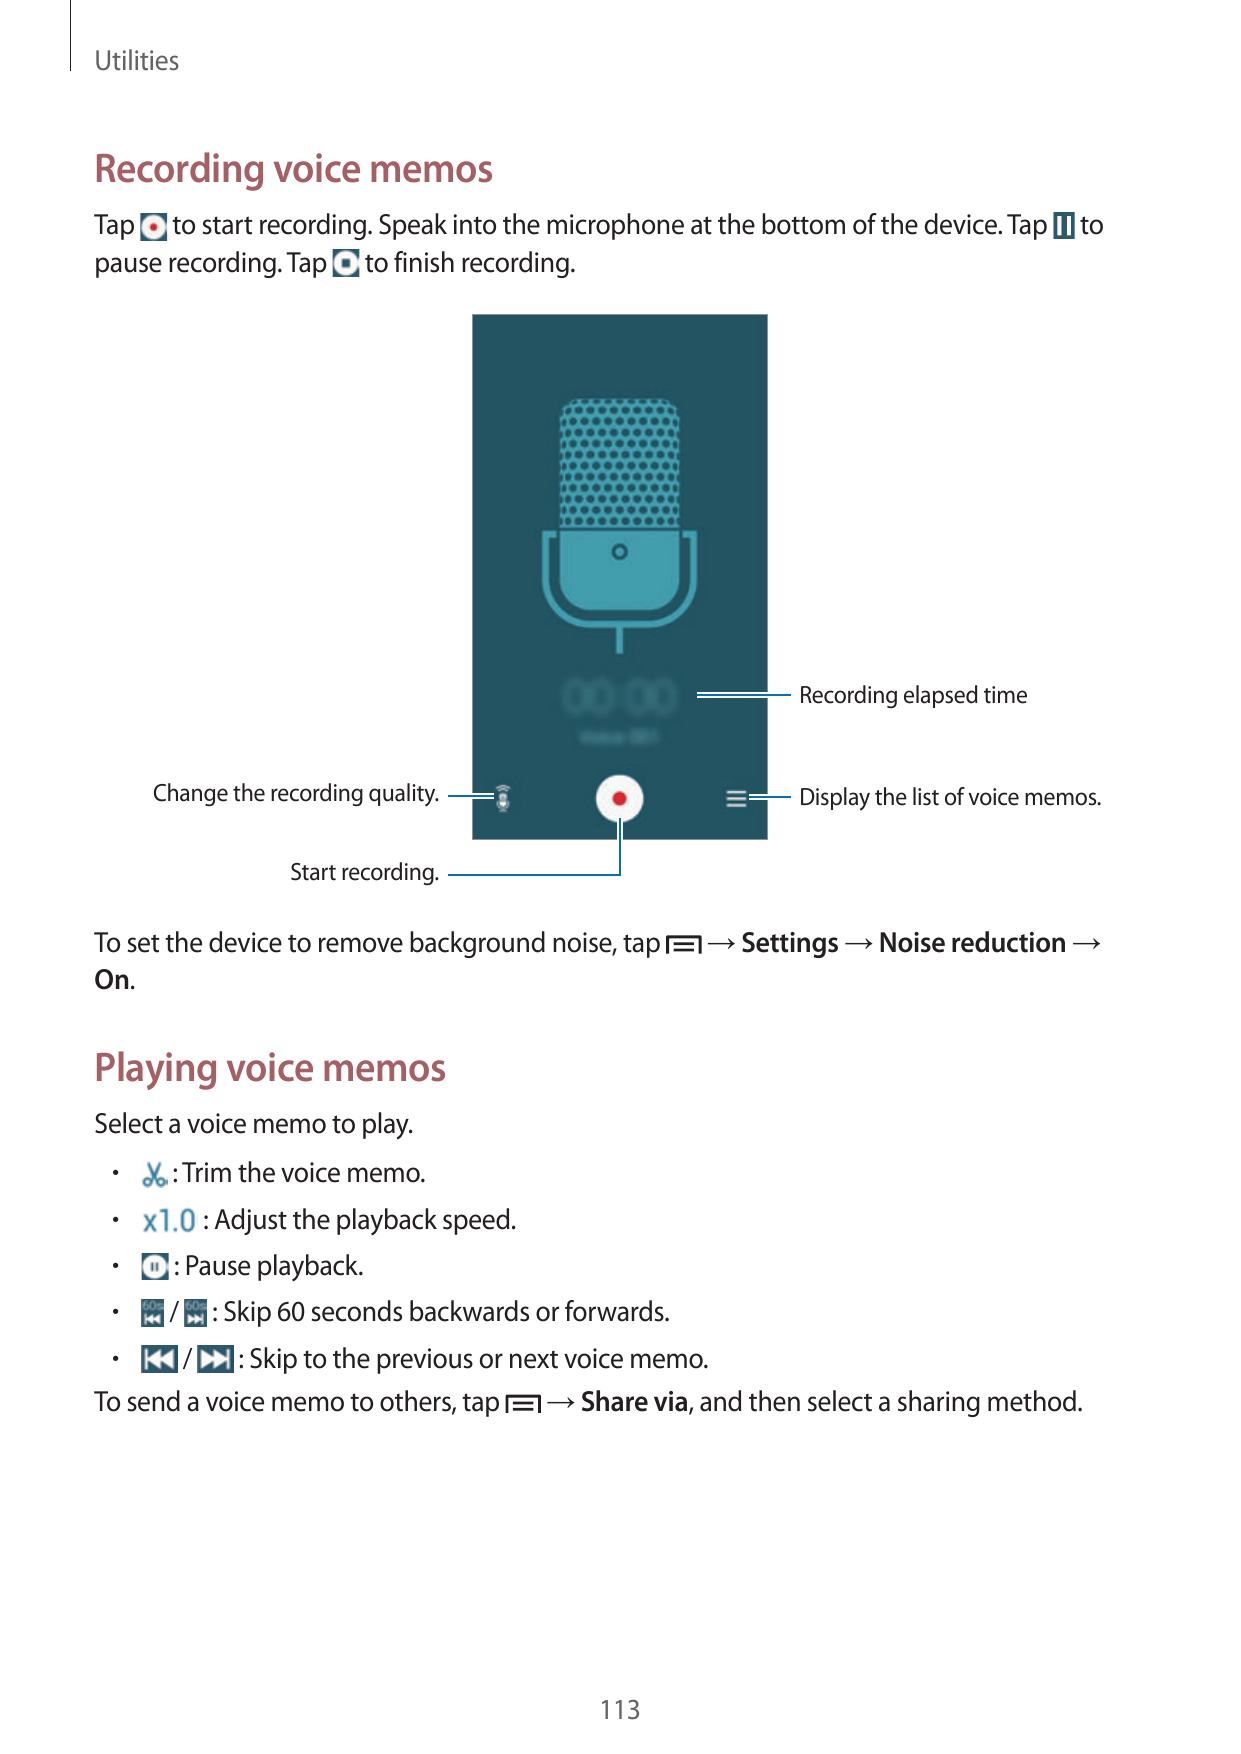 UtilitiesRecording voice memosTap to start recording. Speak into the microphone at the bottom of the device. Tappause recording.